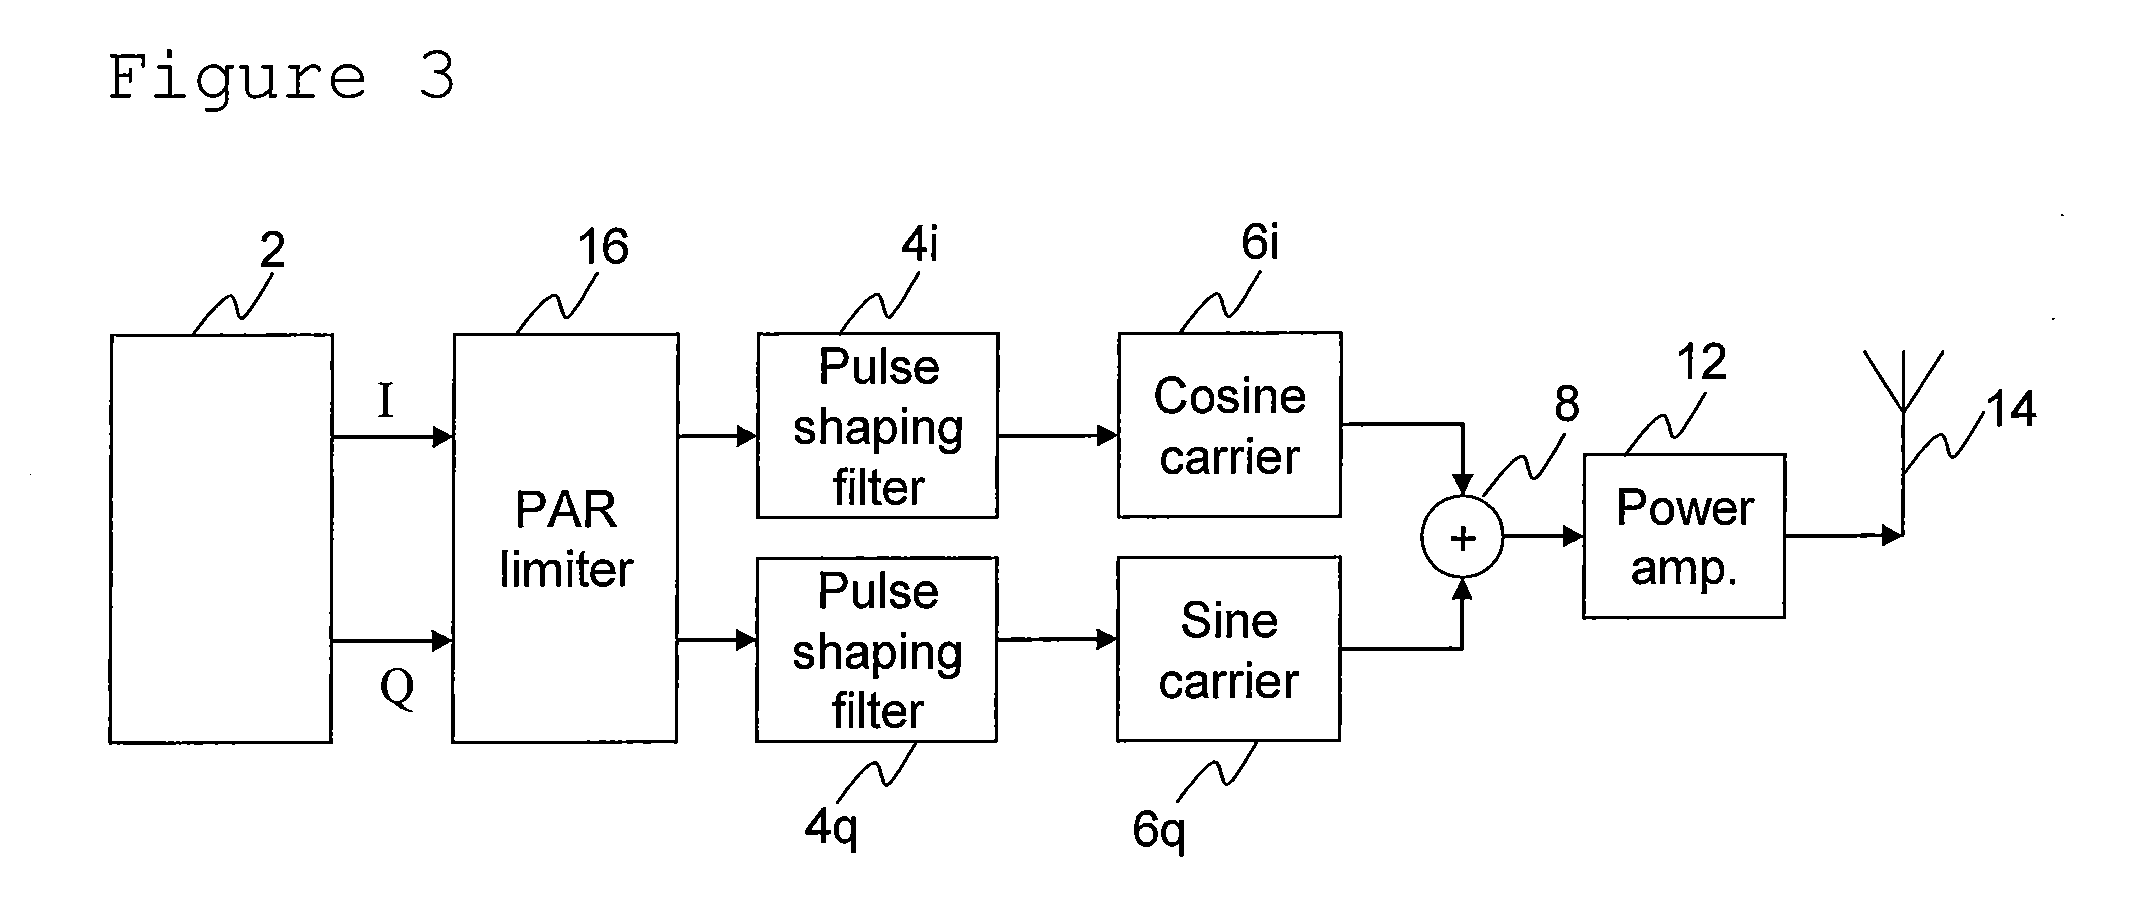 Transmitting a signal from a power amplifier